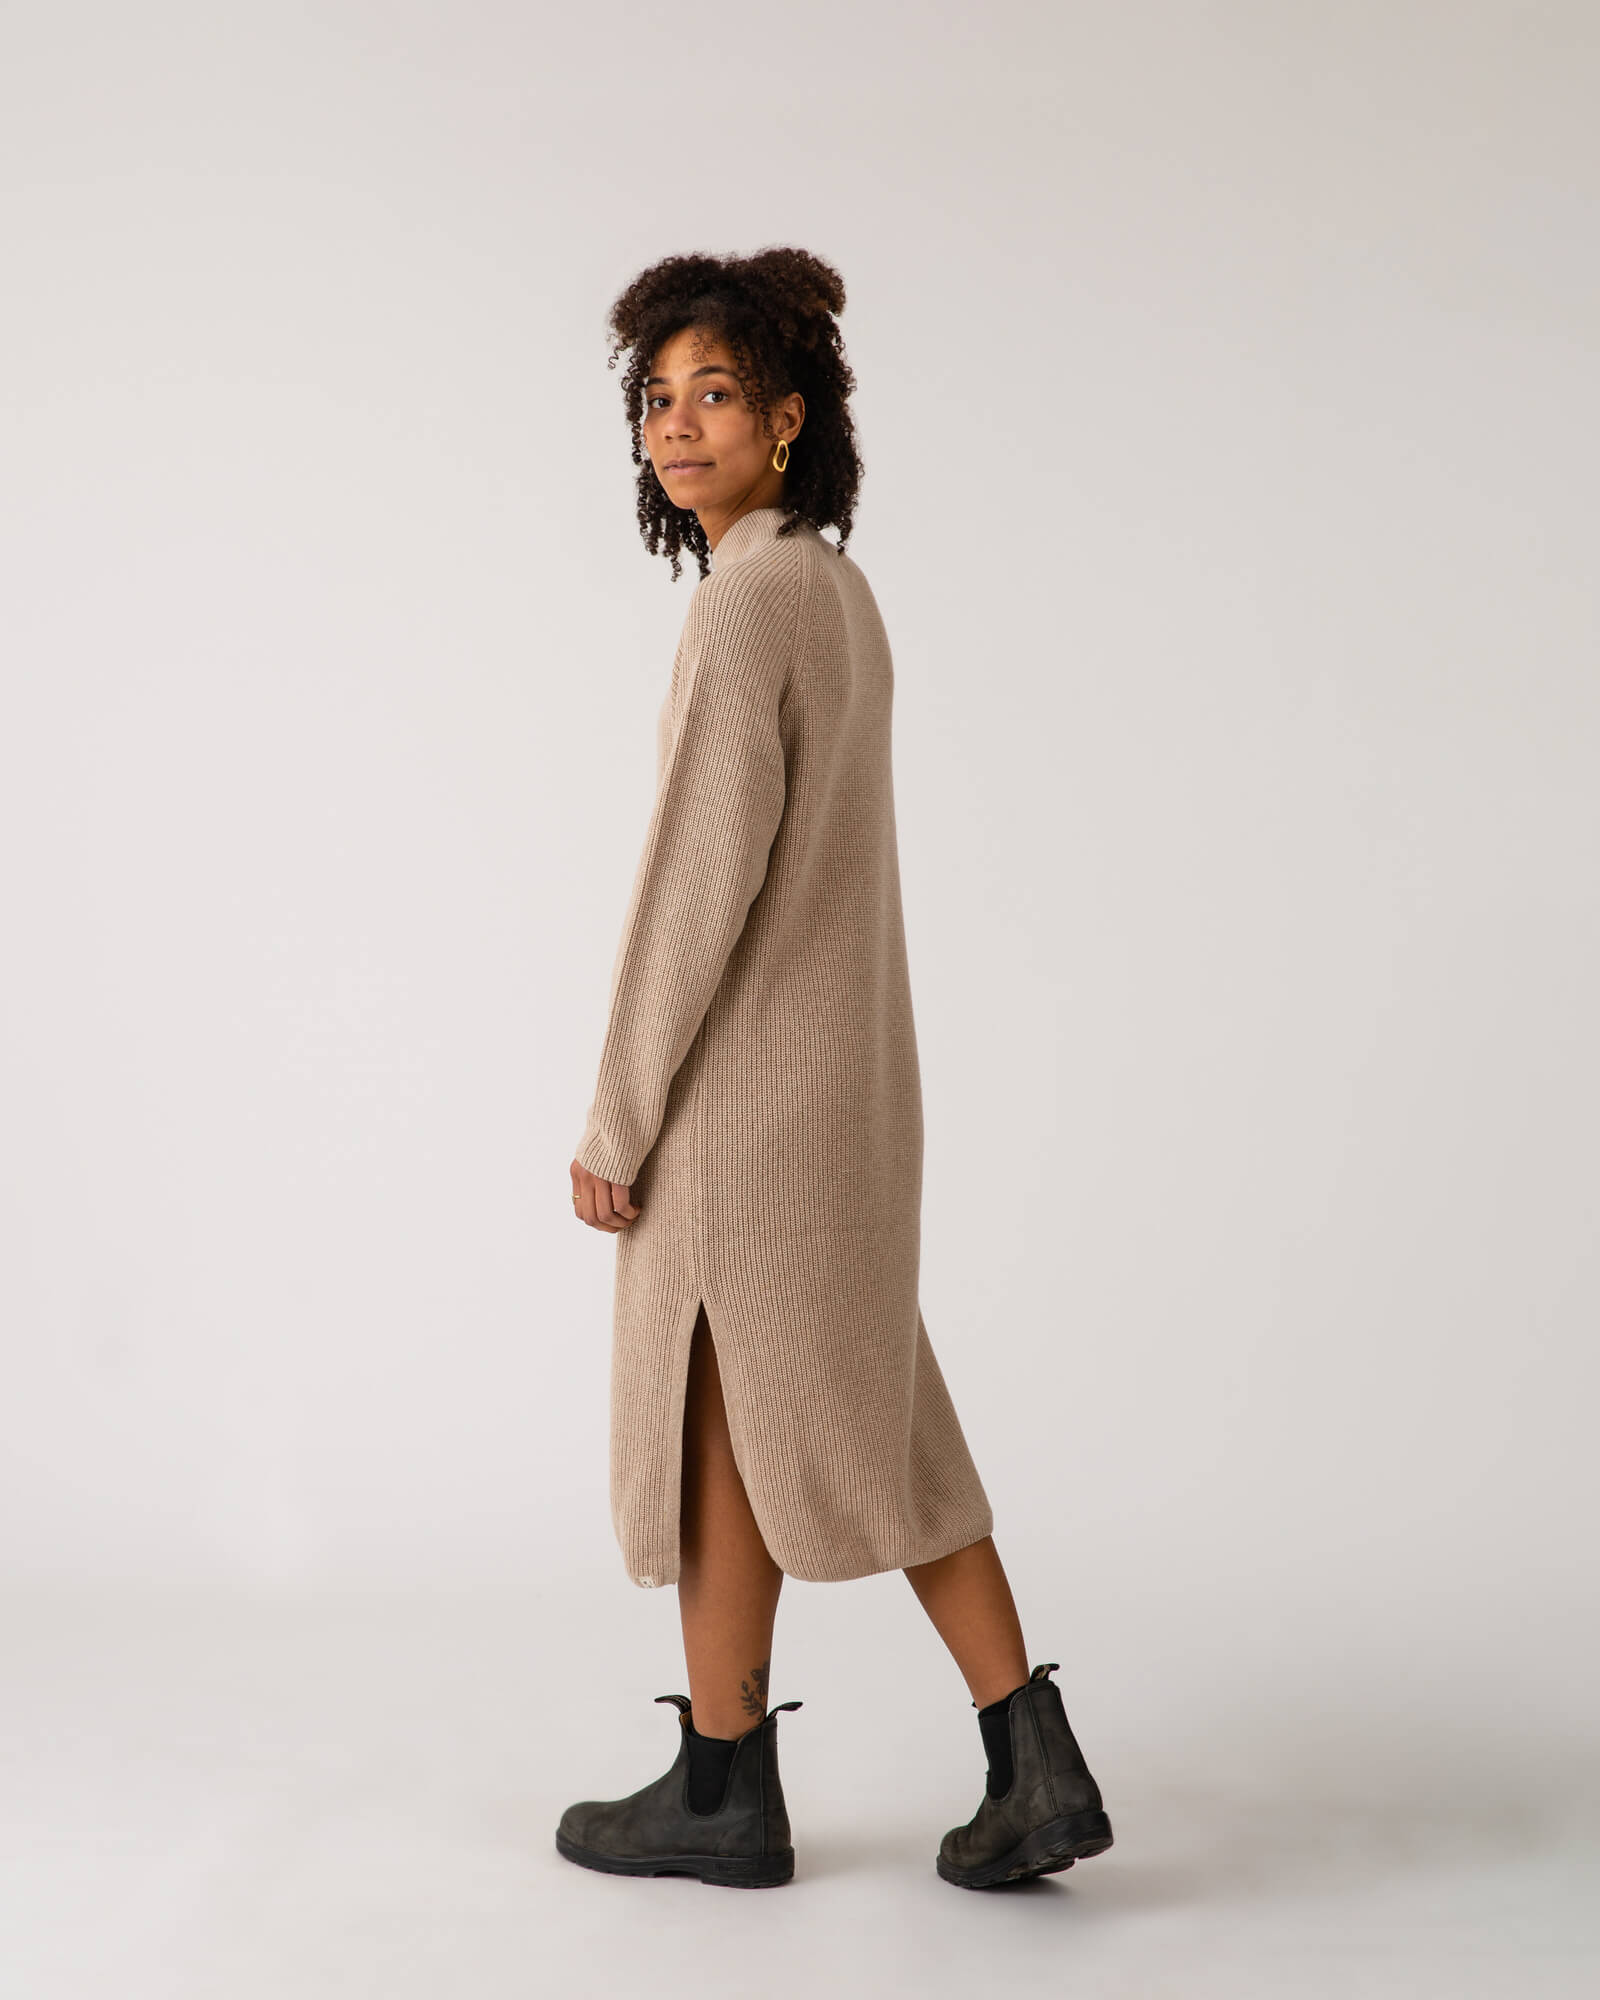 Light brown, knitted limestone dress made from recycled wool by Matona